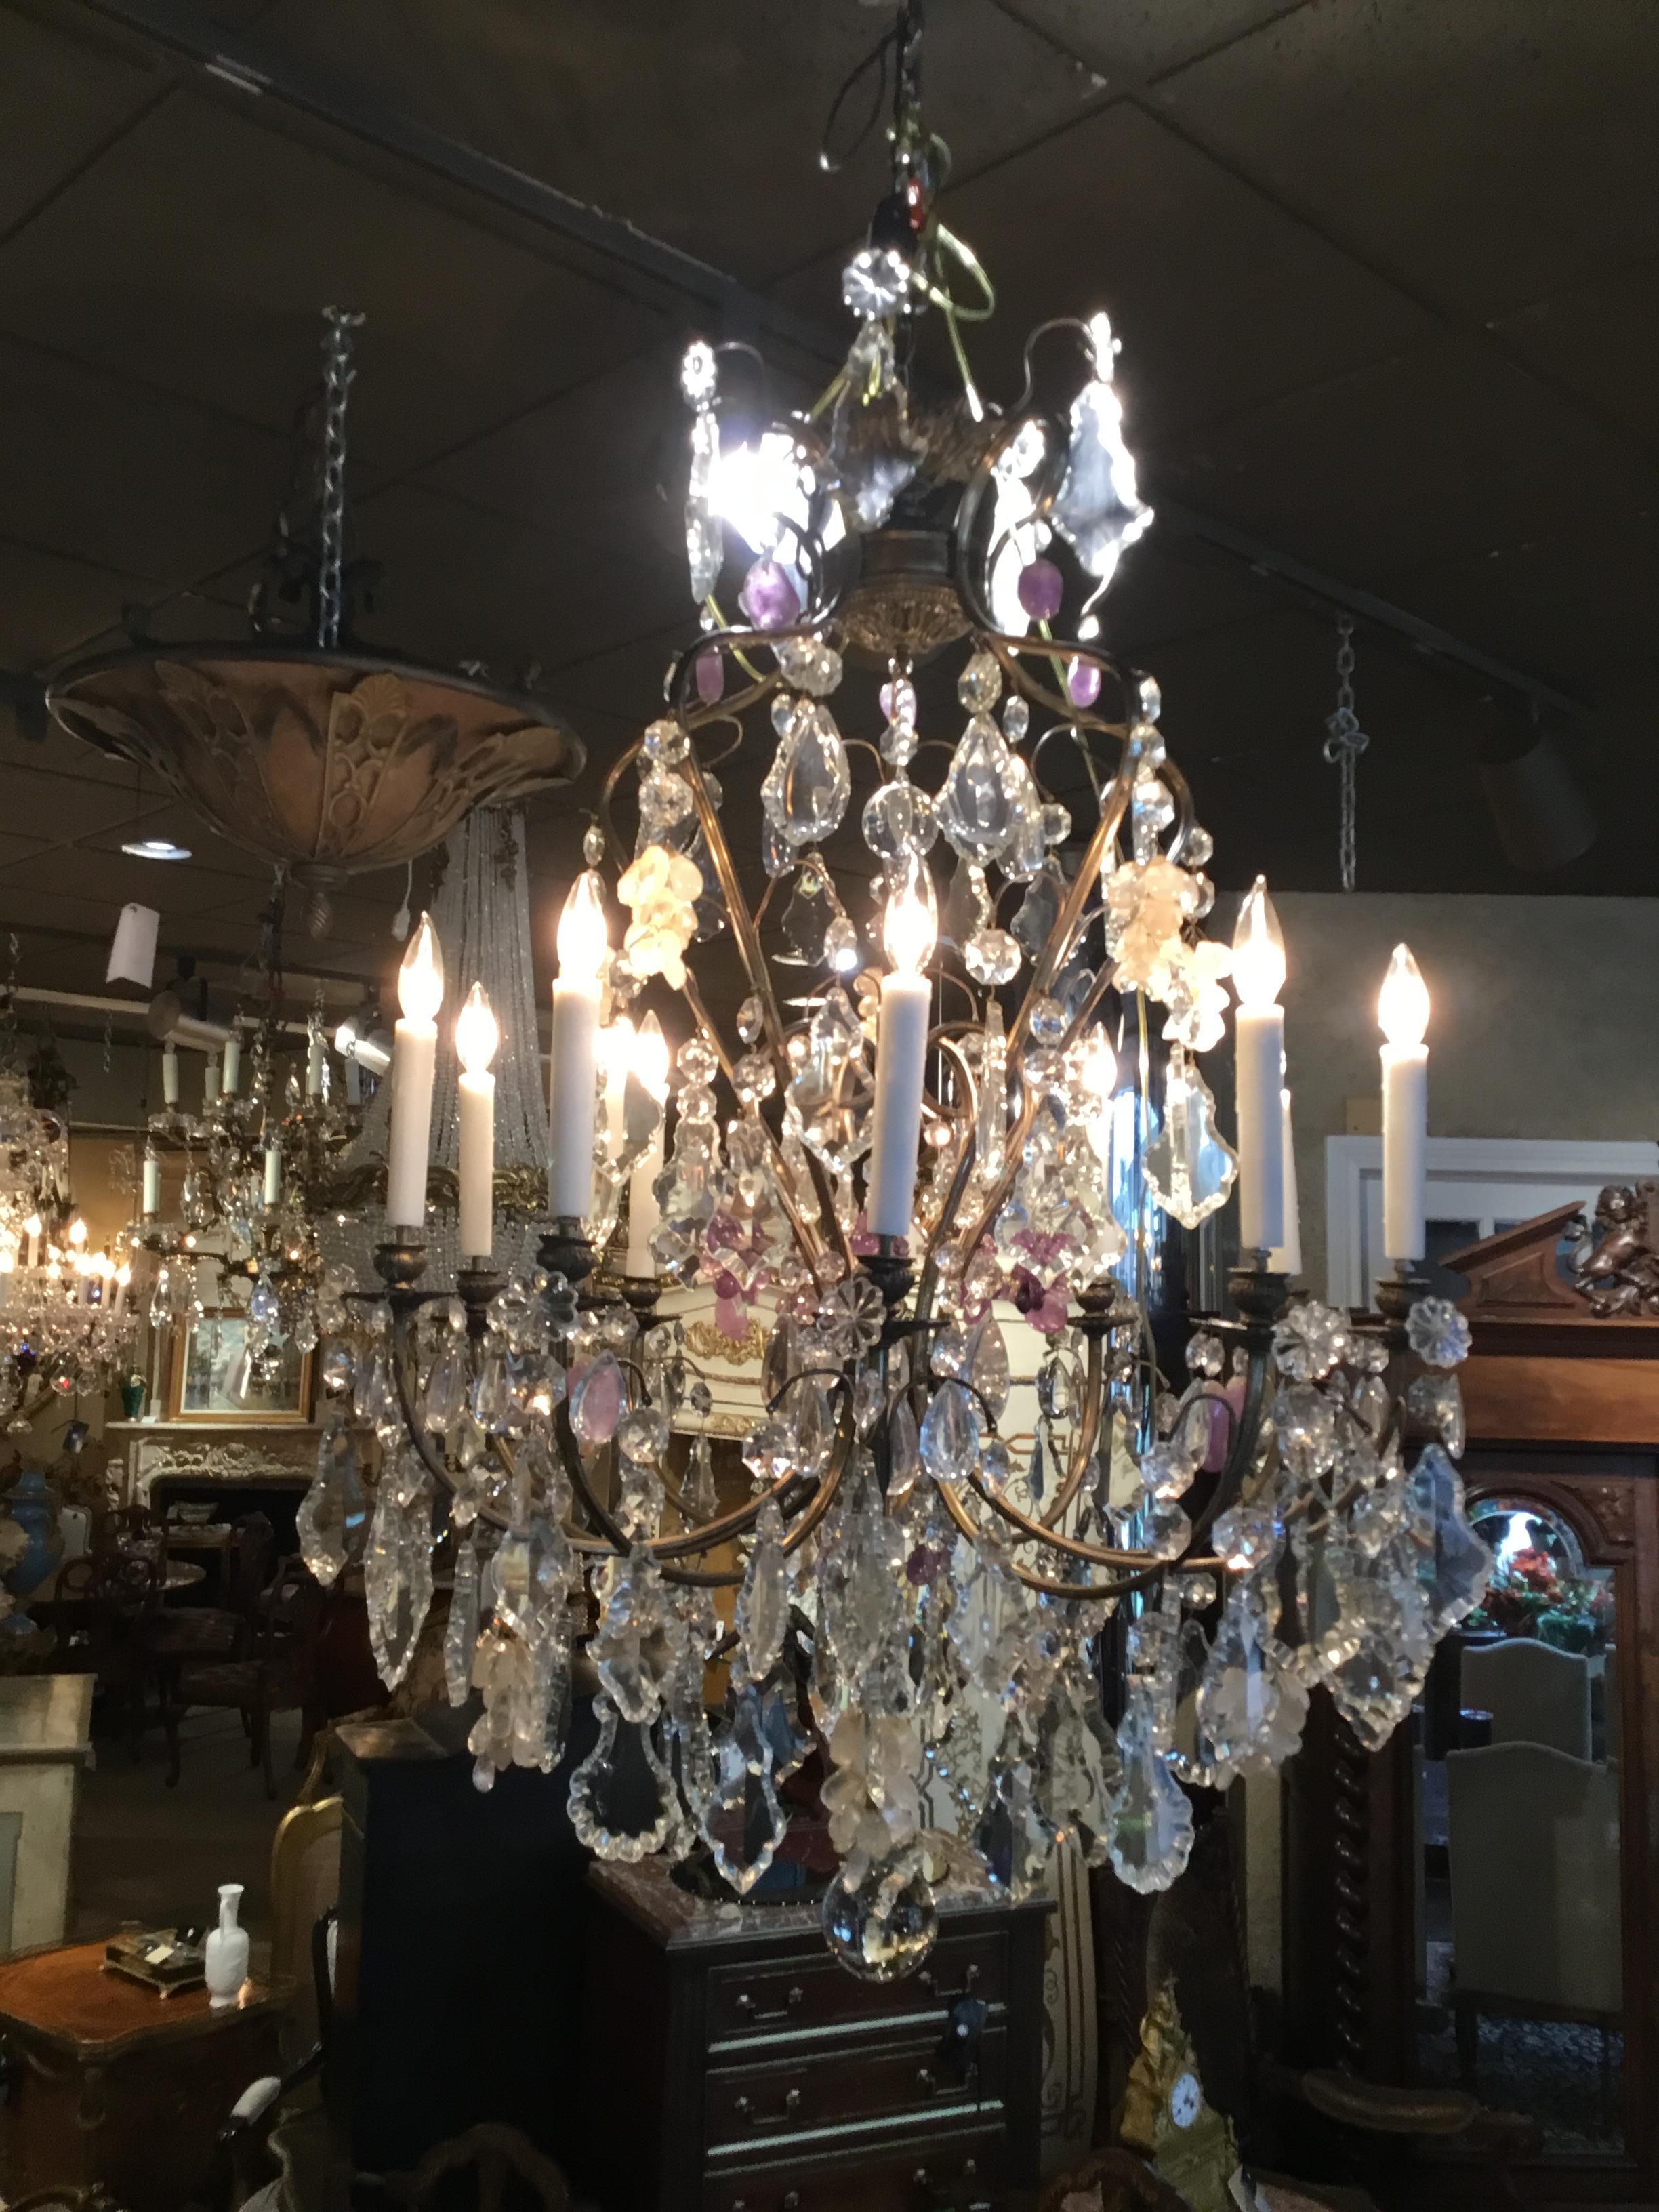 Large crystal chandelier with ten lights around the perimeter and having antique bronze
Scrolling arms. Grape -like clusters of crystal in amethyst and rock crystal are scattered
Throughout this fixture.